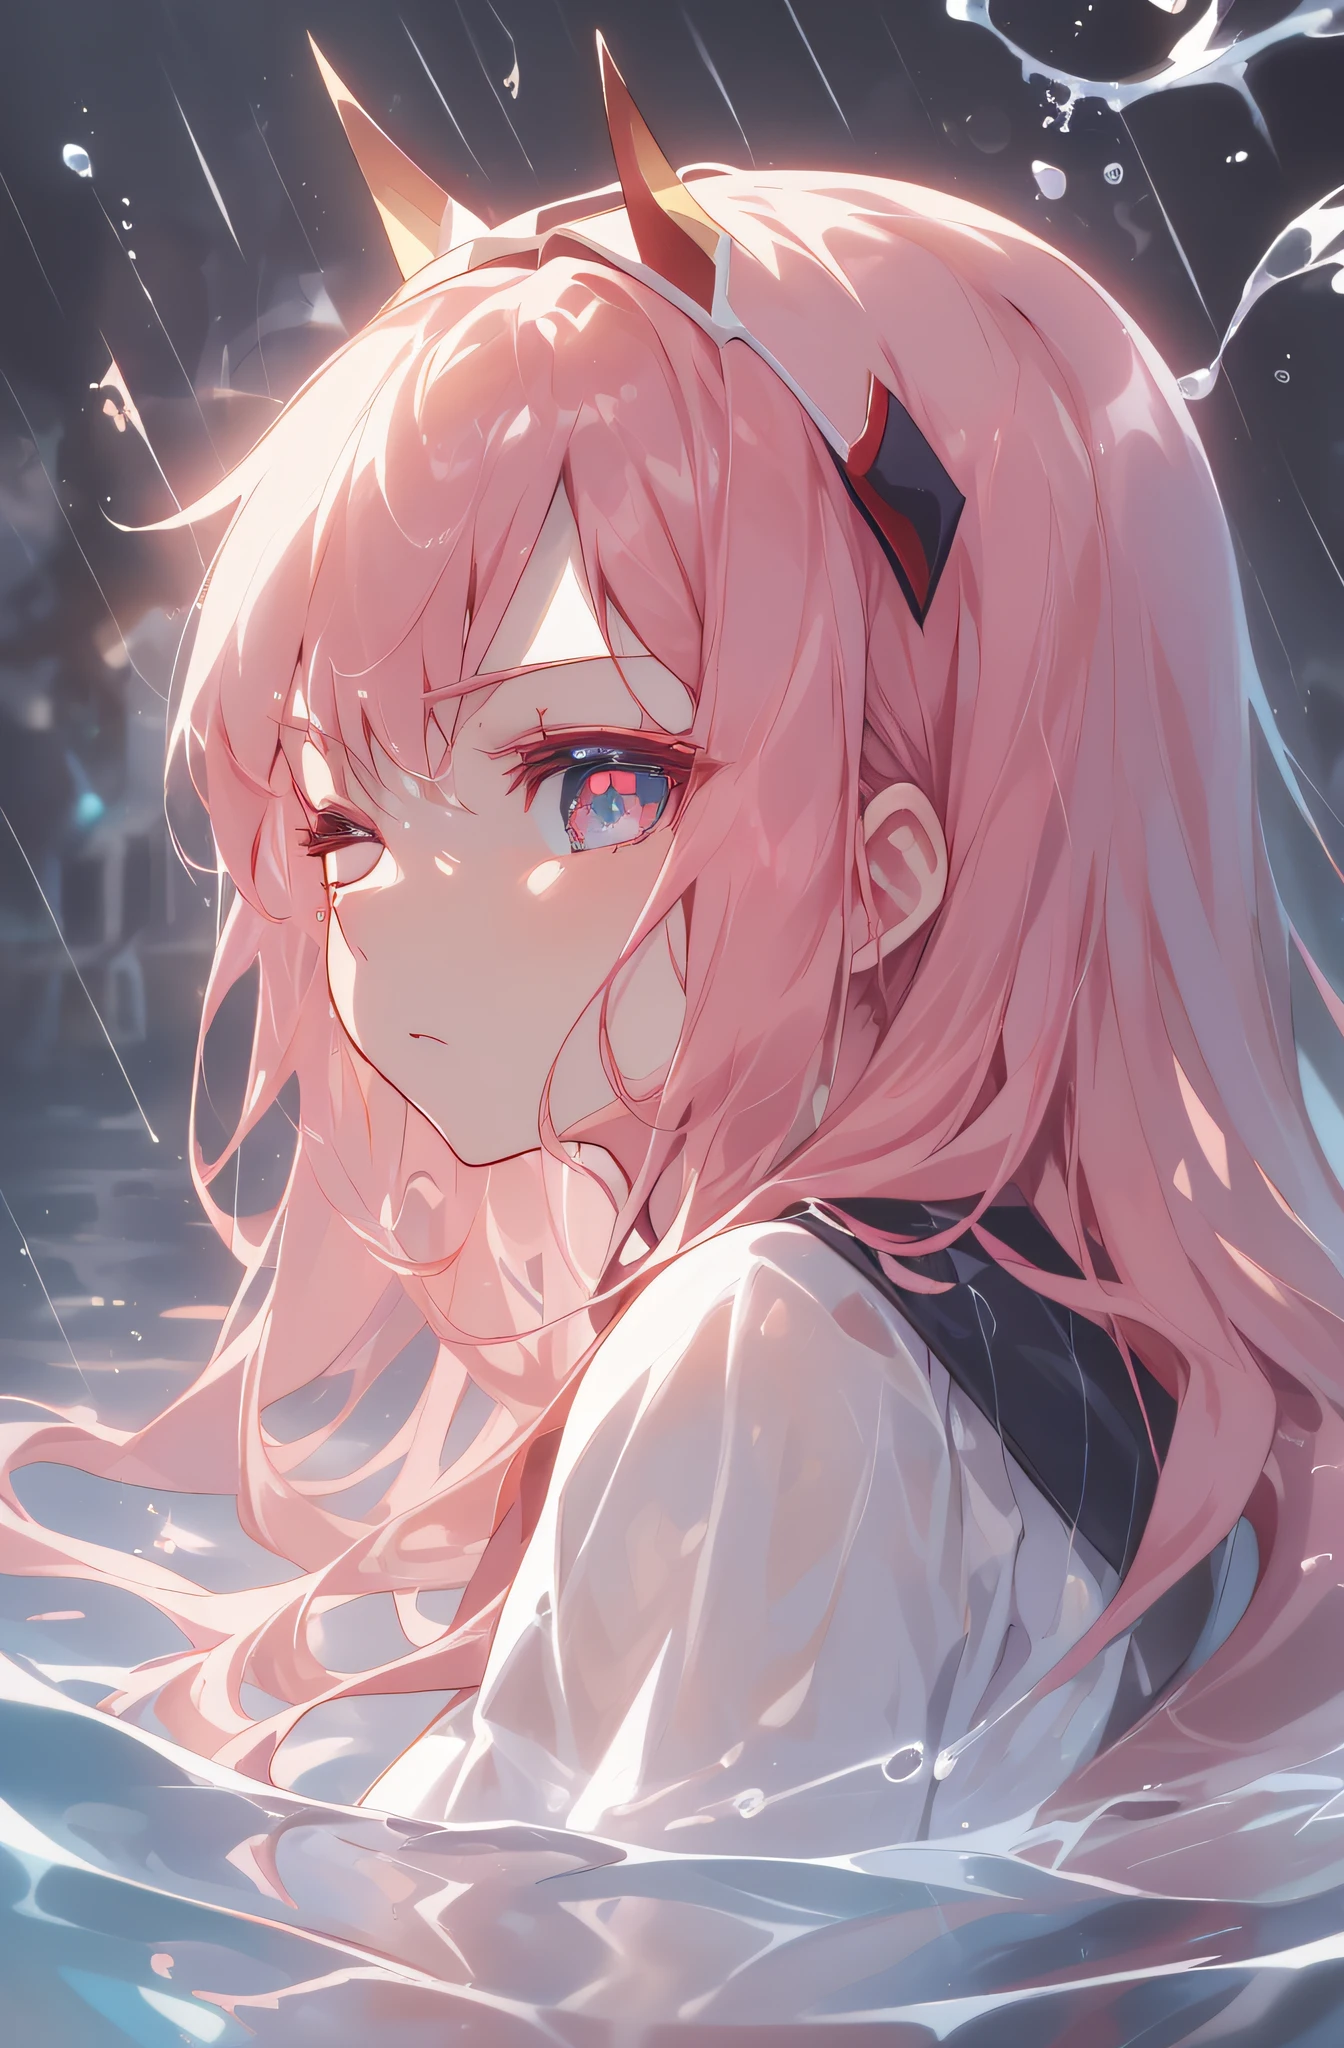 (Two-dimensional animation style: 1.4), (Japanese animation: 1.9), HD, (golden lighting: 1, 4), white skin, full picture bright, horn, (clear eyes), white sunlight, hair glowing (((falling rain: 1.2), sunlight, sun, waves, (water surface), close up, magnifying eyes, glowing eyes, long pink hair, clear eyes, eyes close-up, eye close-up, prayer, looking at the girl from the side, side, holy light, (transparent clothes), underwater, bubbles, (water divergence), (air flow divergence), serious 😠, eyes open, eyes closed